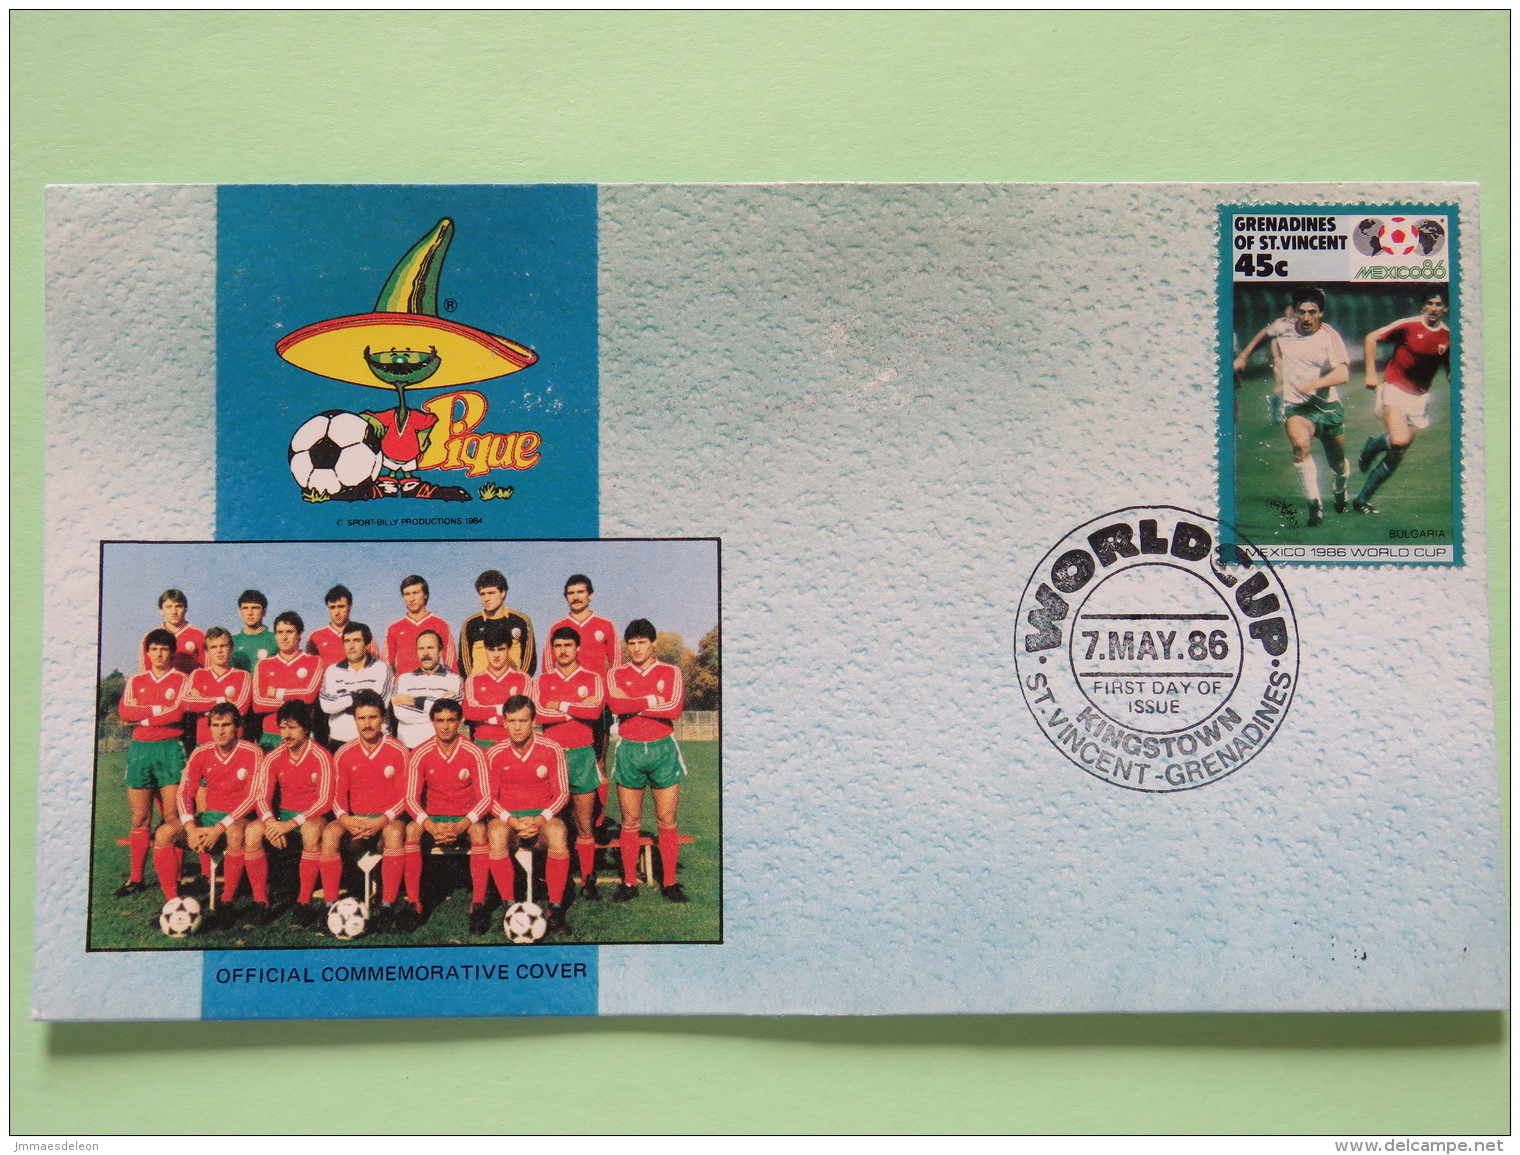 Grenadines Of St. Vincent 1986 FDC Cover - Football Soccer Mexico 86 - St.Vincent & Grenadines